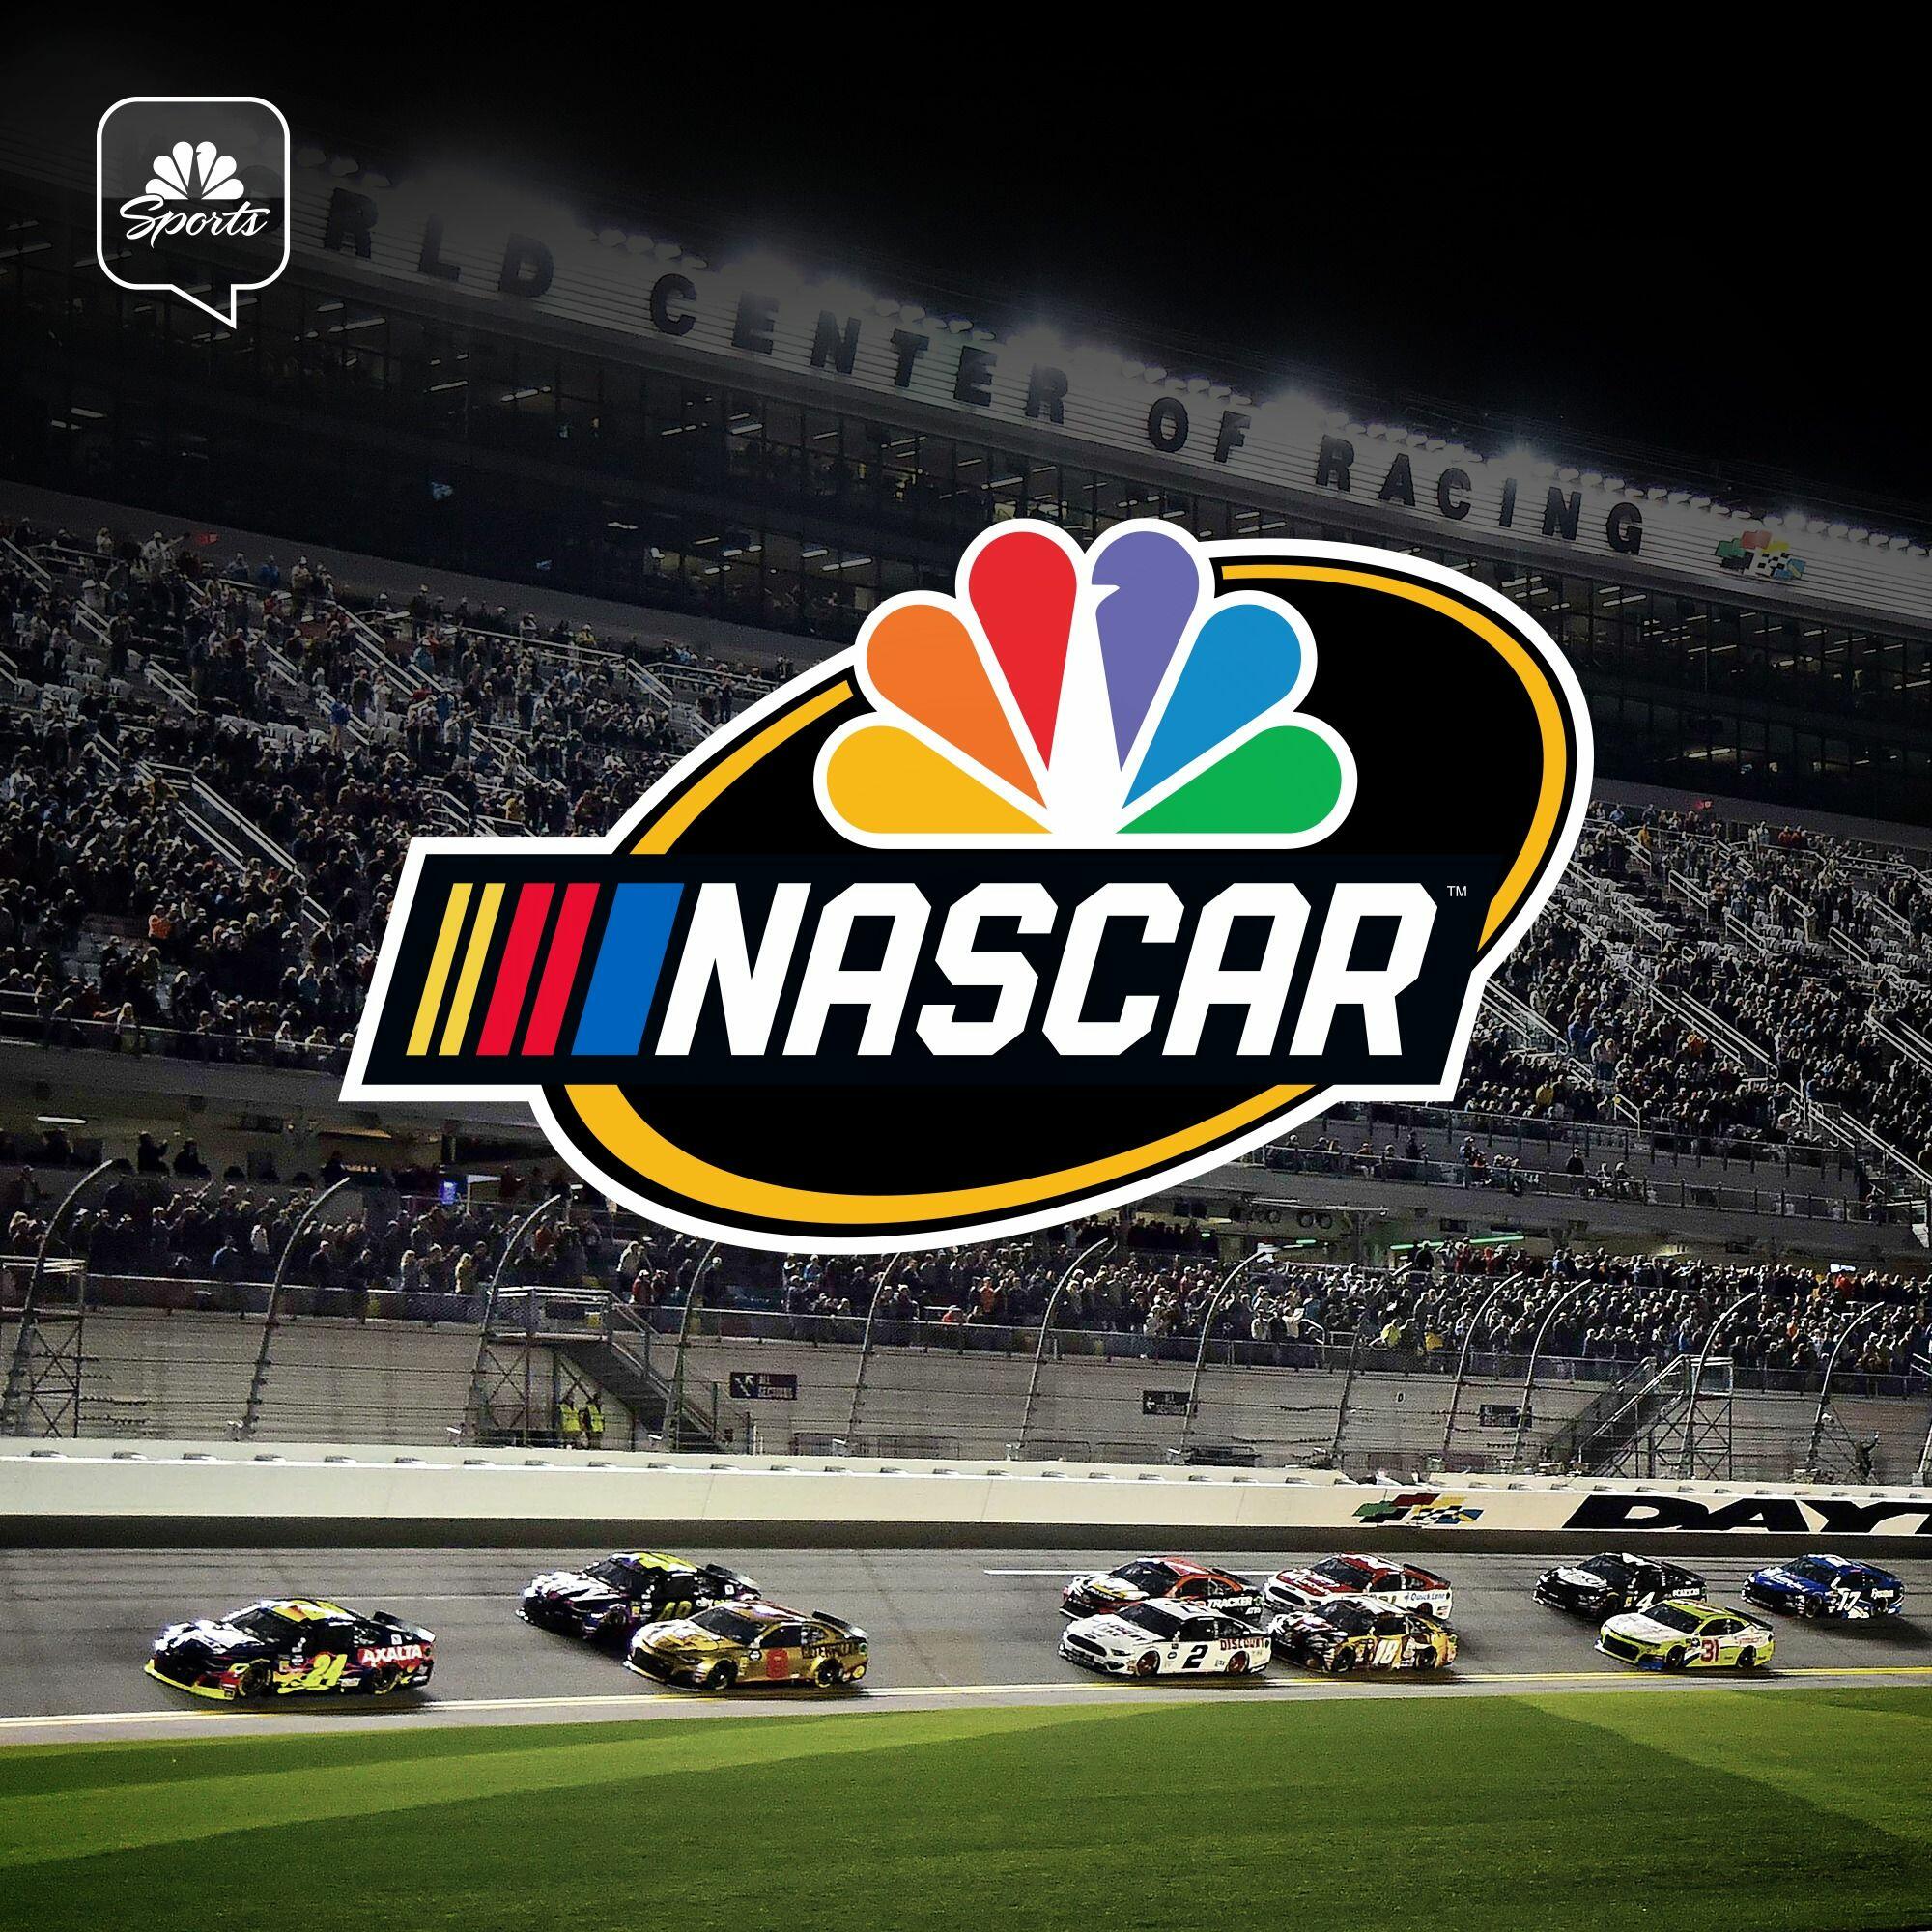 ♫ NASCAR on NBC podcast Discussing the latest NASCAR news, including a weekly recap of races, events and a look ahead to whats next in the sport